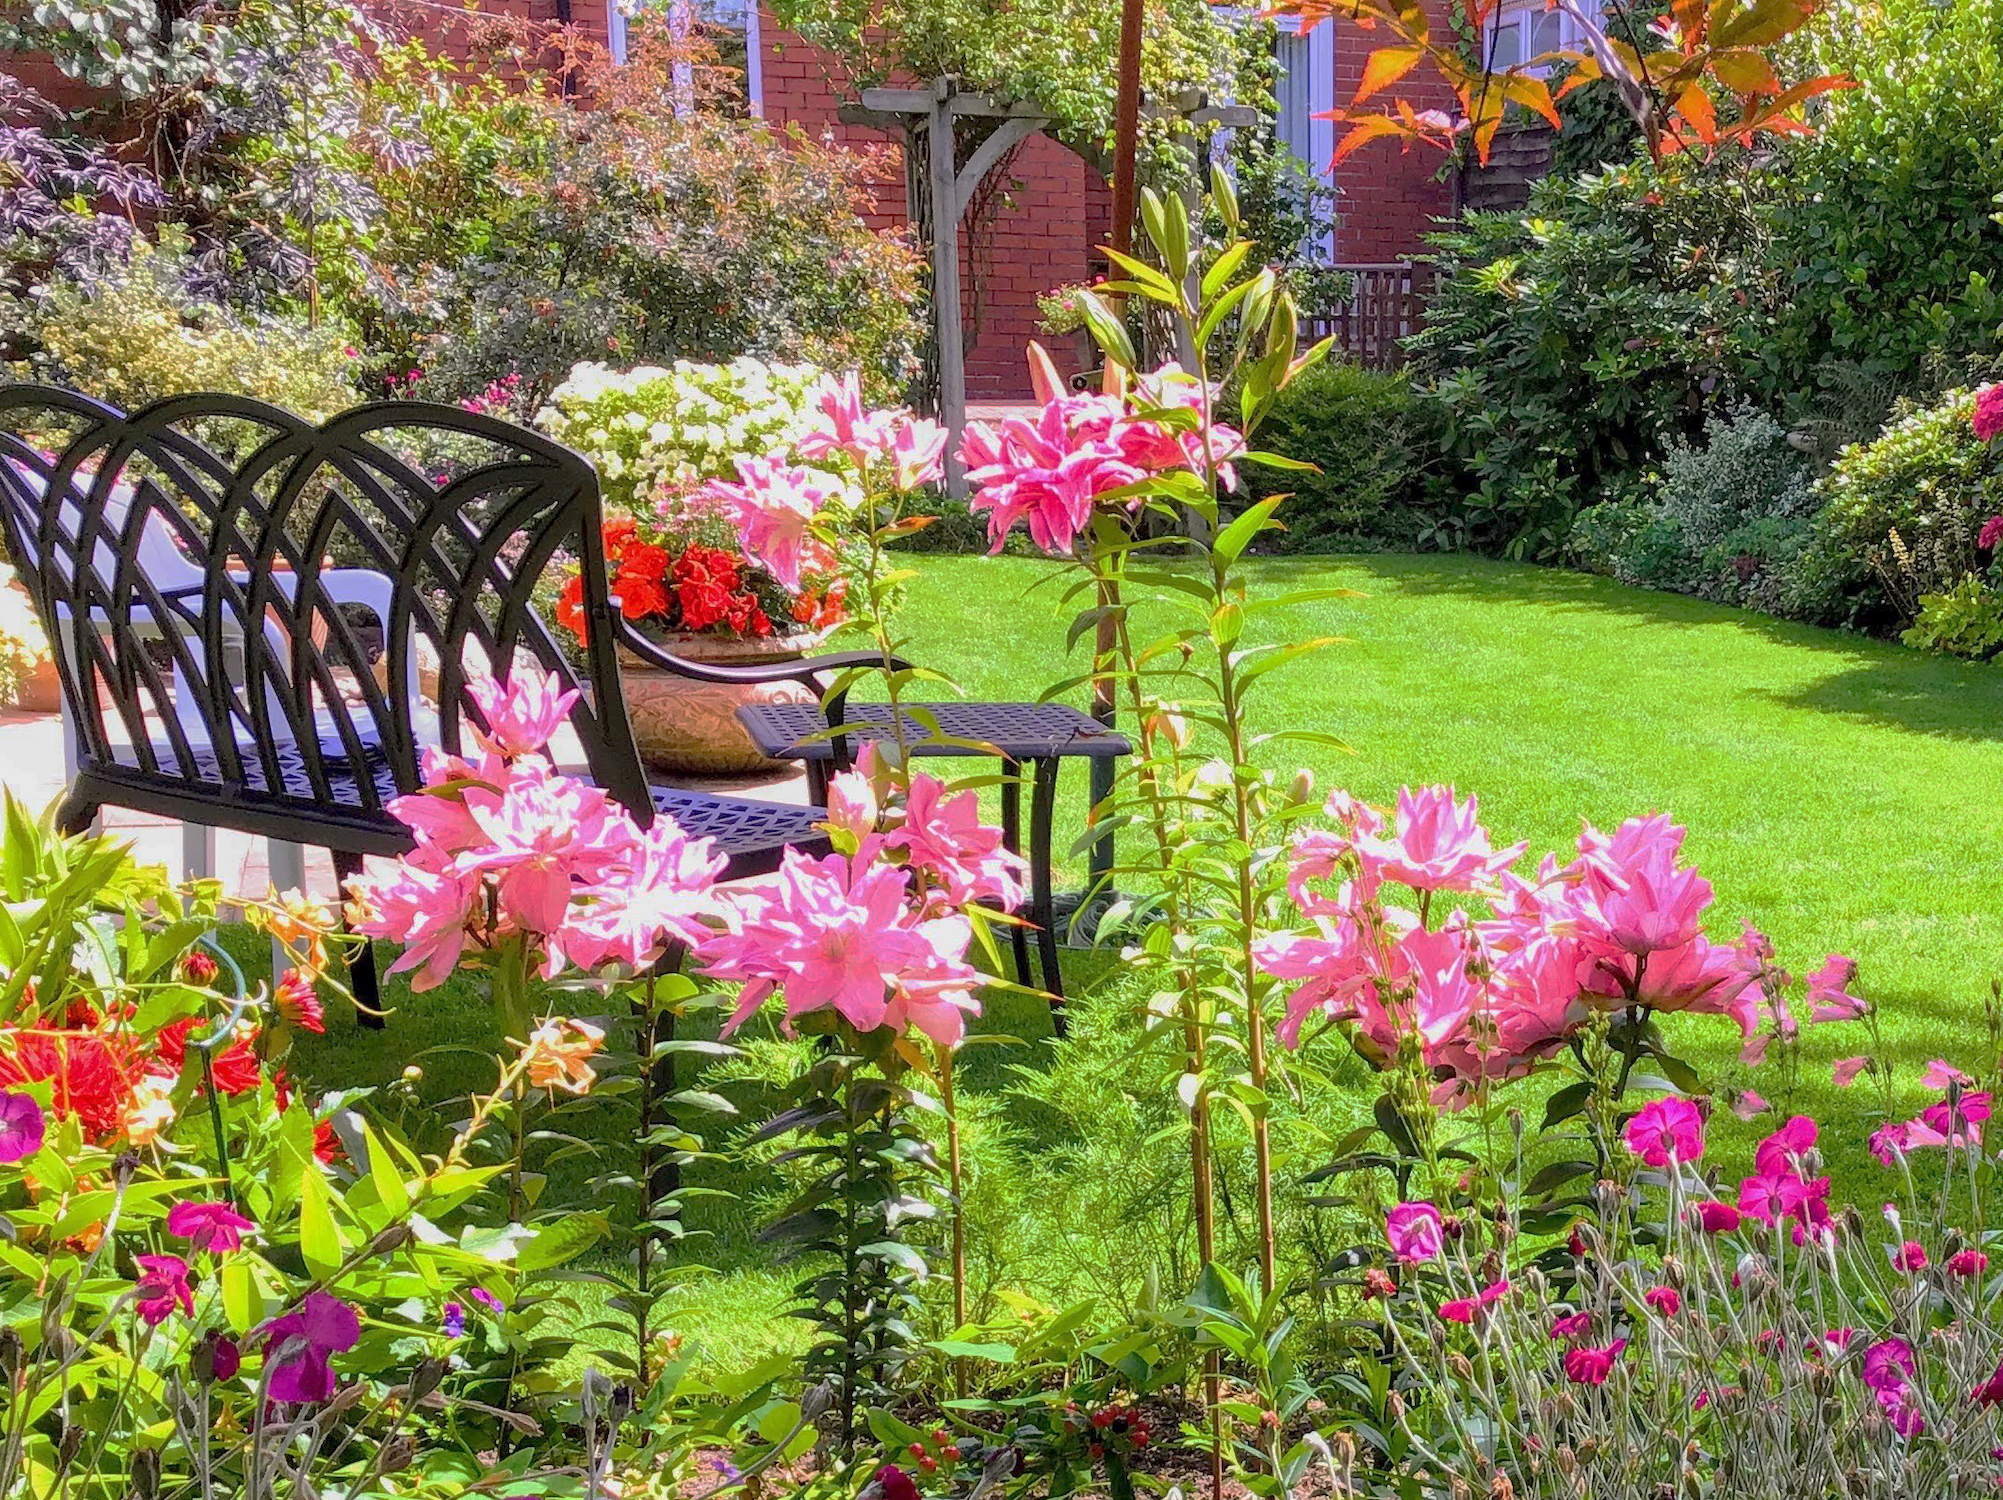 What makes a well-designed patio or garden?